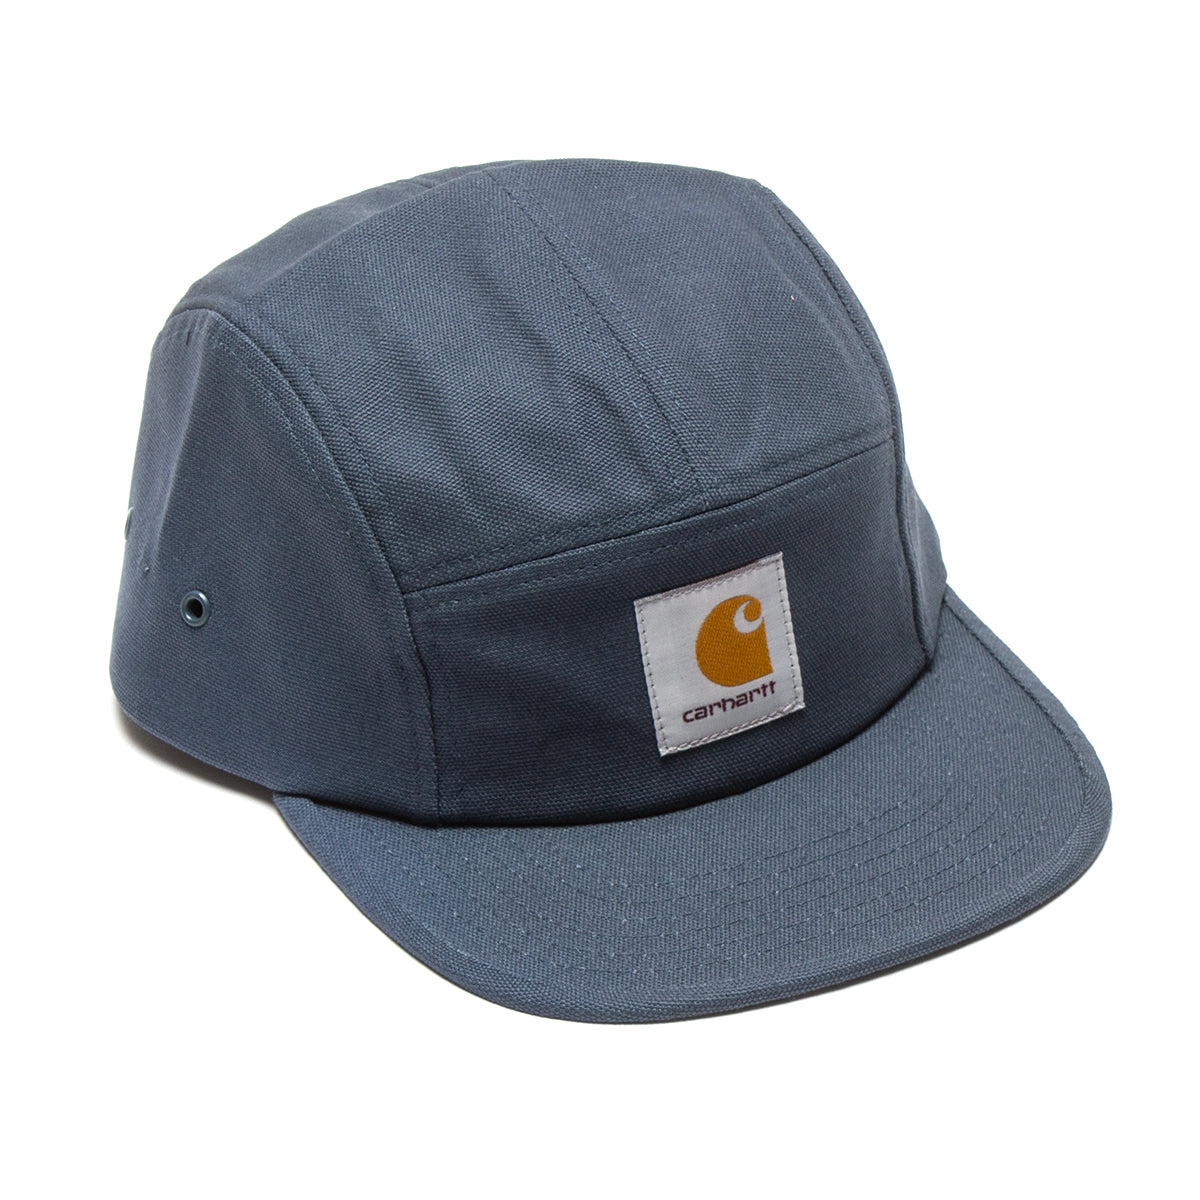 Carhartt WIP | Backley Cap  Style # I016607-0R Color : Ore